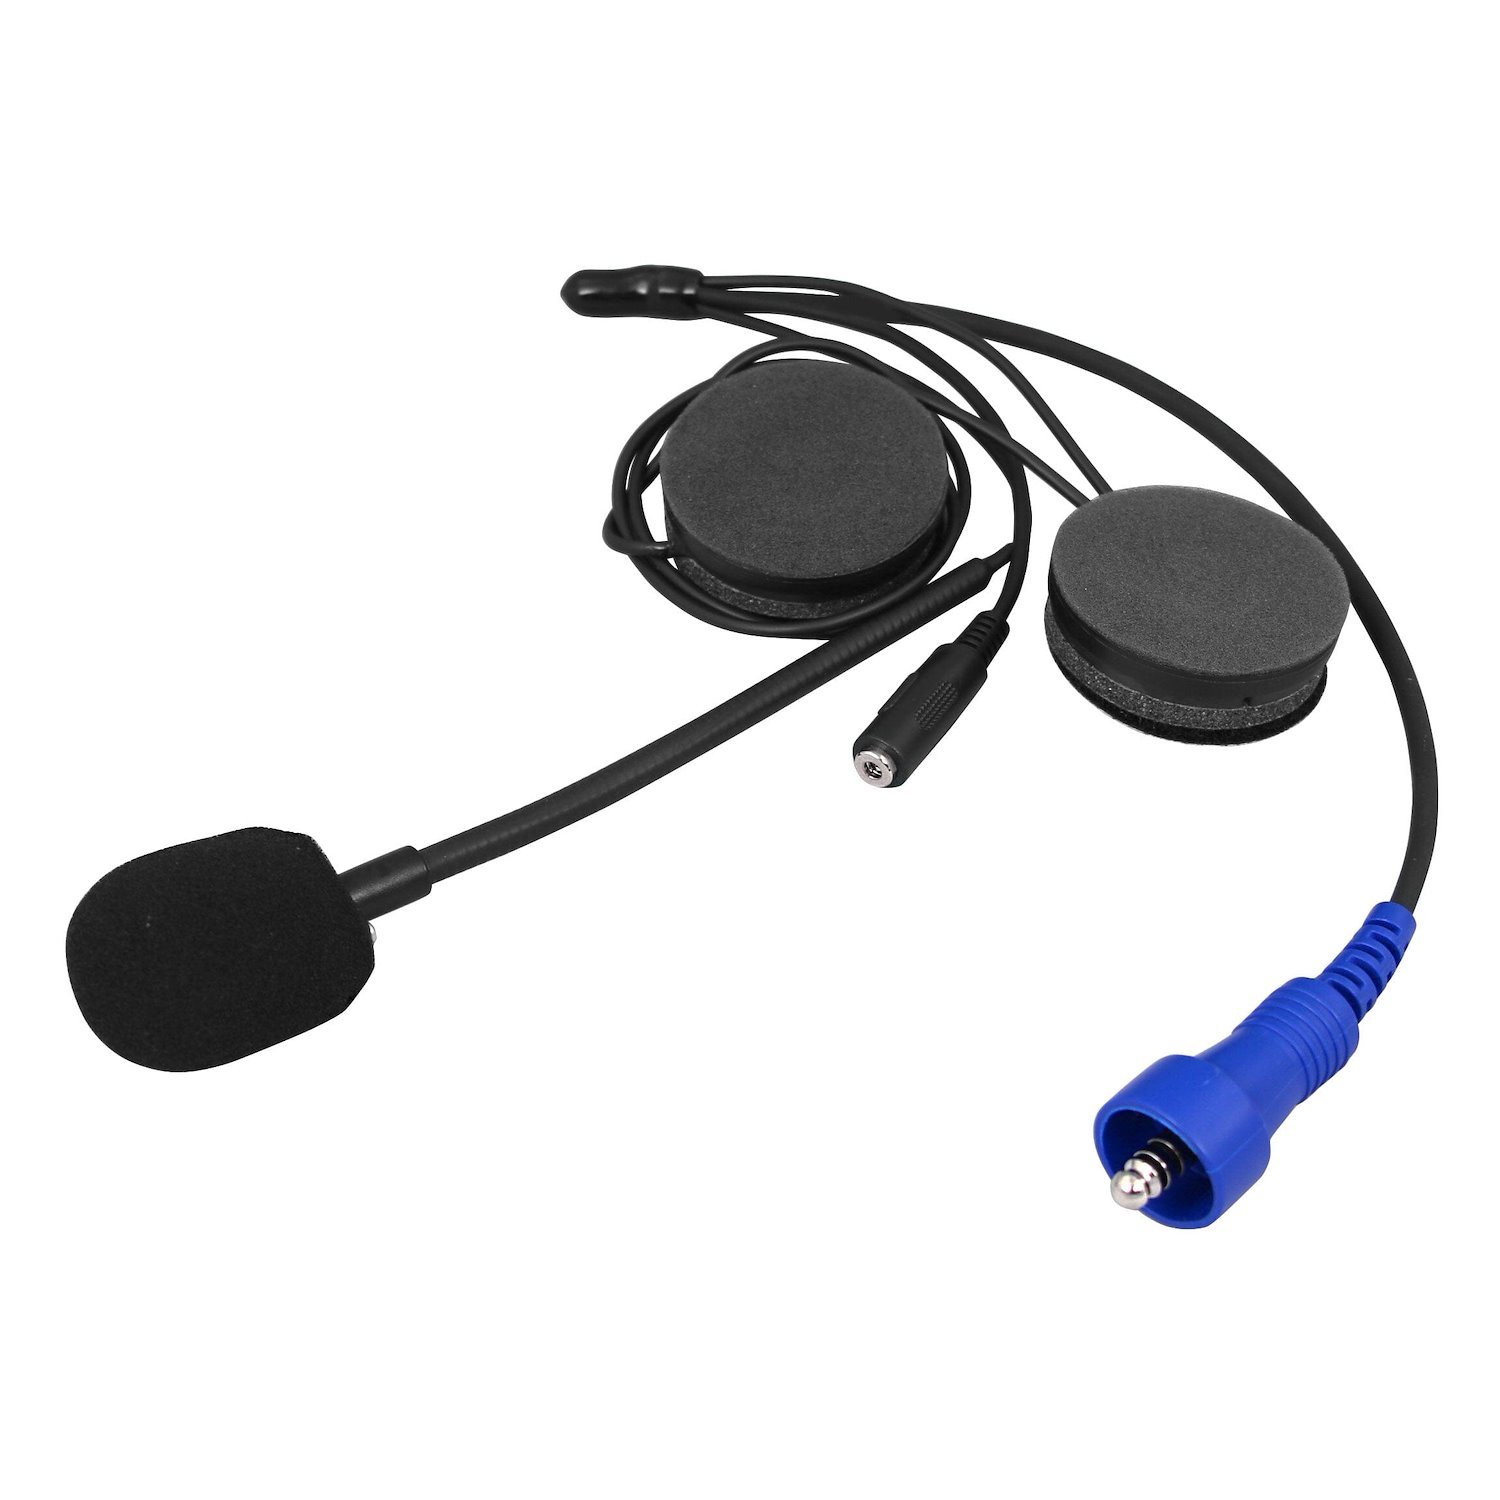 MH-KIT MOTO MAX Complete Motorcycle Communication Kit, w/ Heavy-Duty OFFROAD Cables, w/out Radio